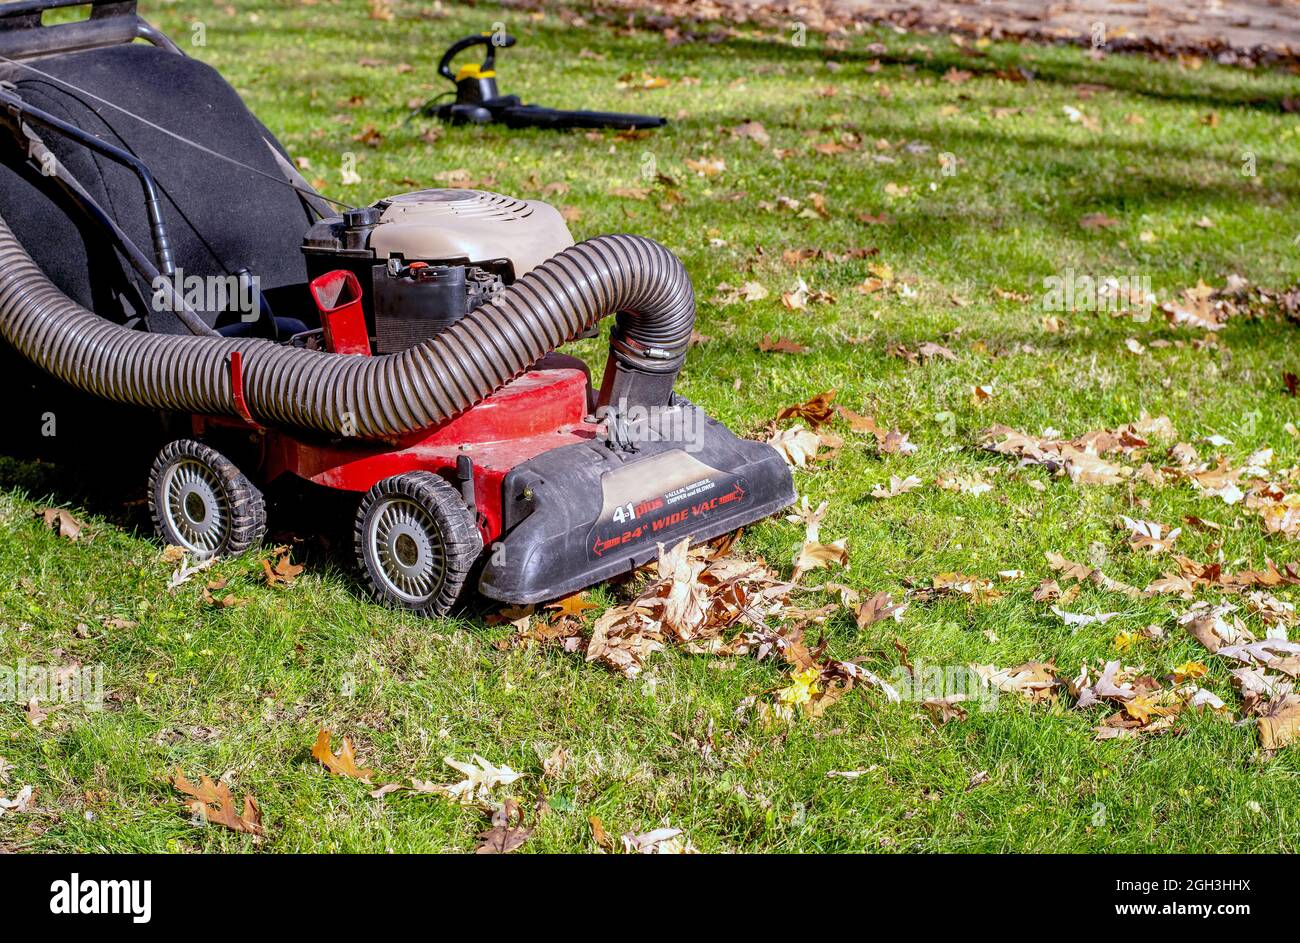 Fall lawn equipment includes a gas powered leaf vacuum and in the  background, a leaf blower. tools to help make fall leaf clean up easier  Stock Photo - Alamy